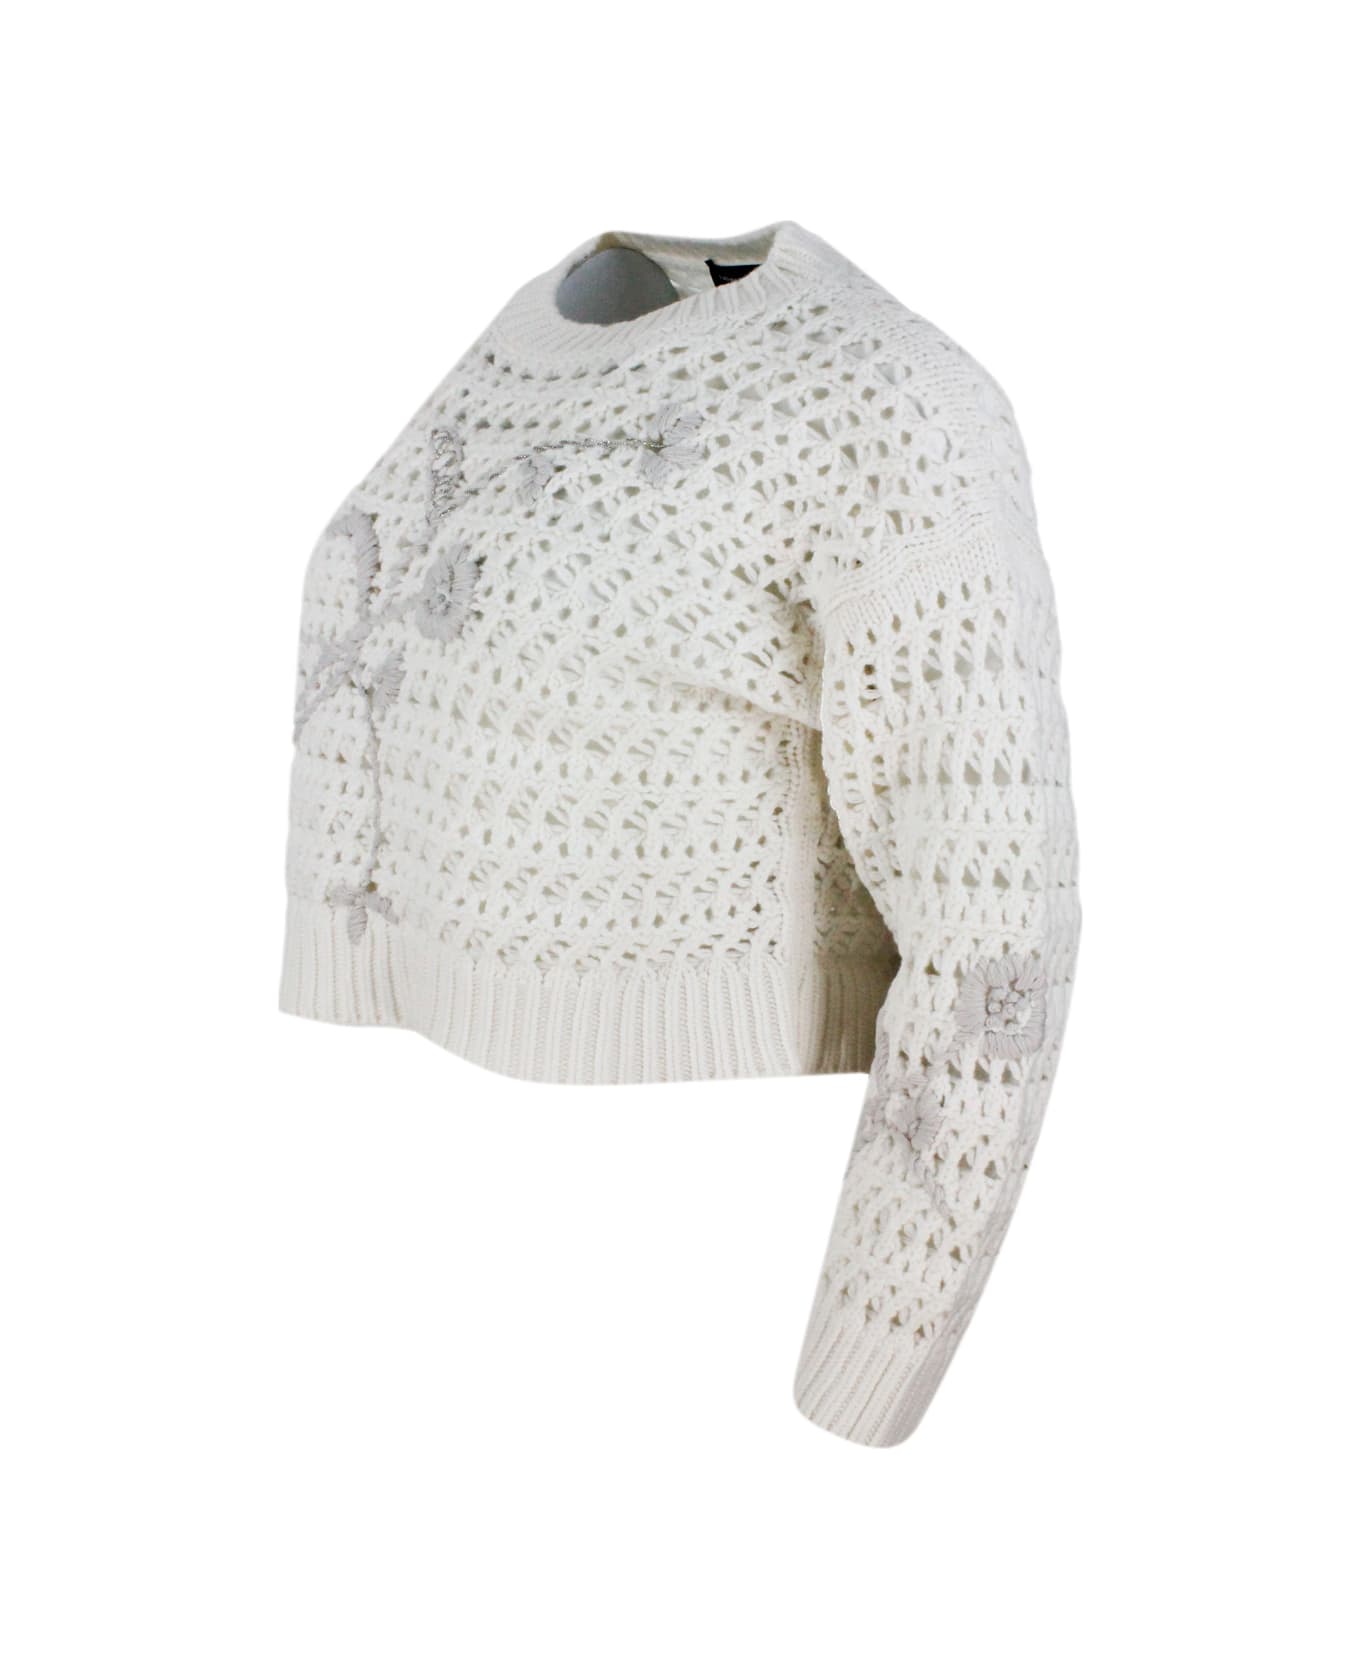 Fabiana Filippi Long-sleeved Round-neck Sweater In Platinum Wool, Silk And Cashmere Yarn With Embroidery And Chain Of Brilliant Jewels On The Front - cream